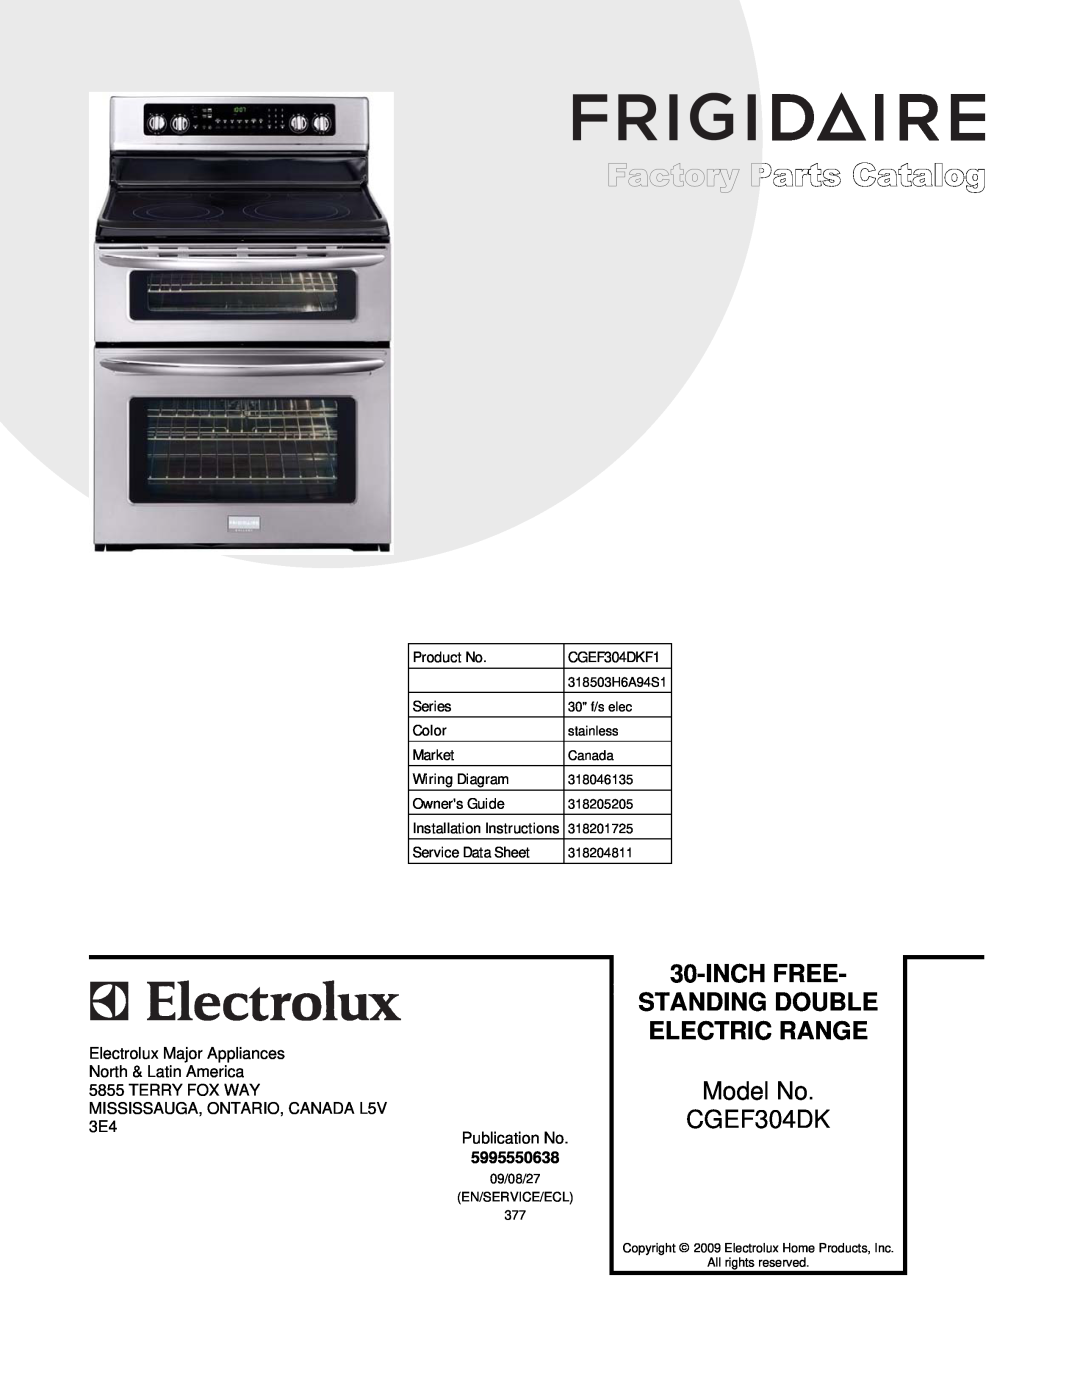 Electrolux installation instructions Product No Series Color Market Wiring Diagram Owners Guide, CGEF304DKF1, Inch Free 